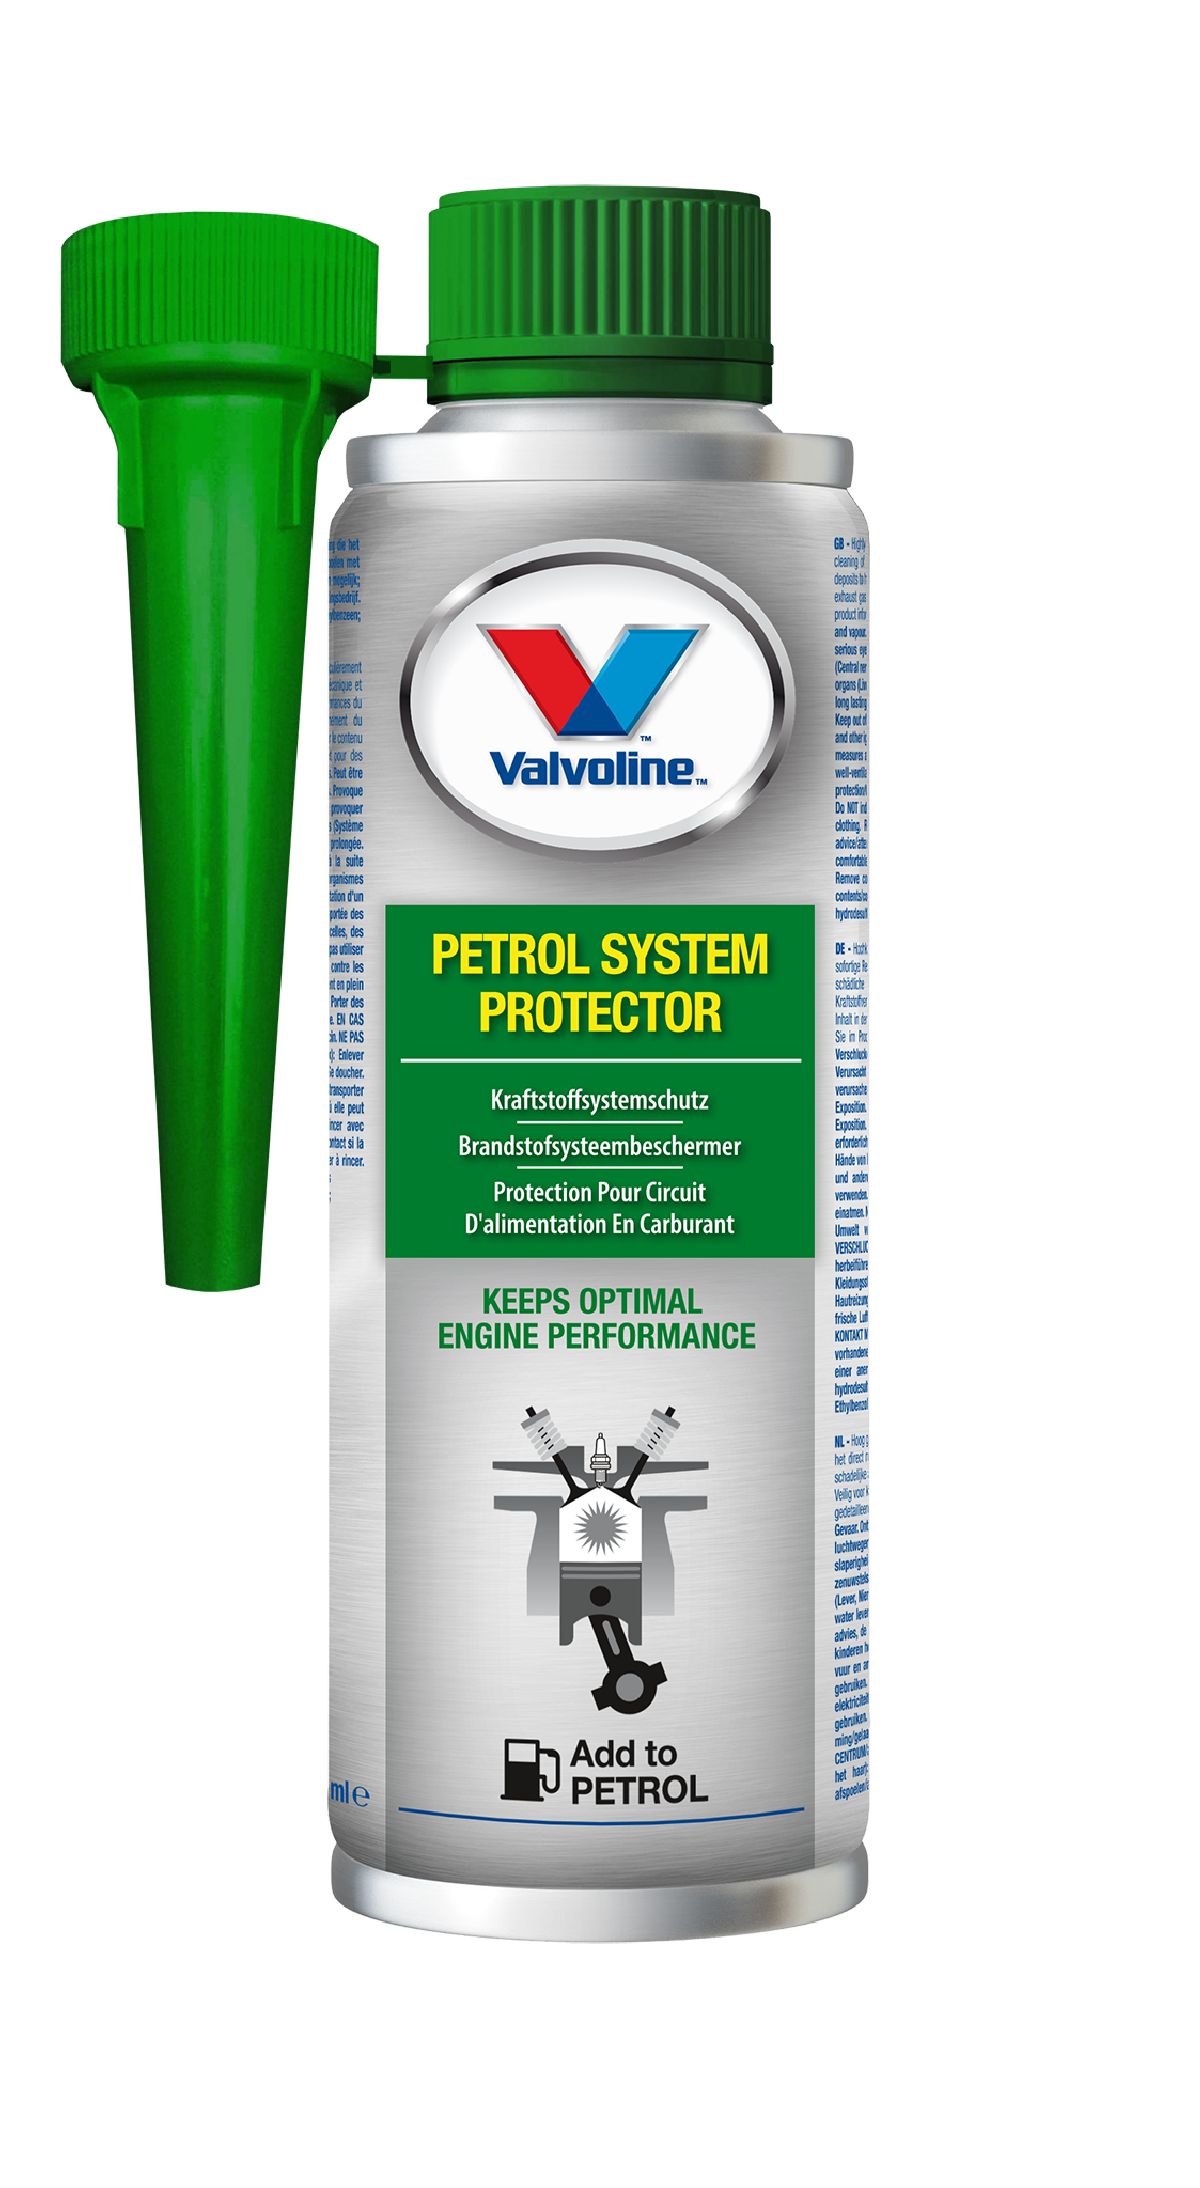 Petrol System Protector